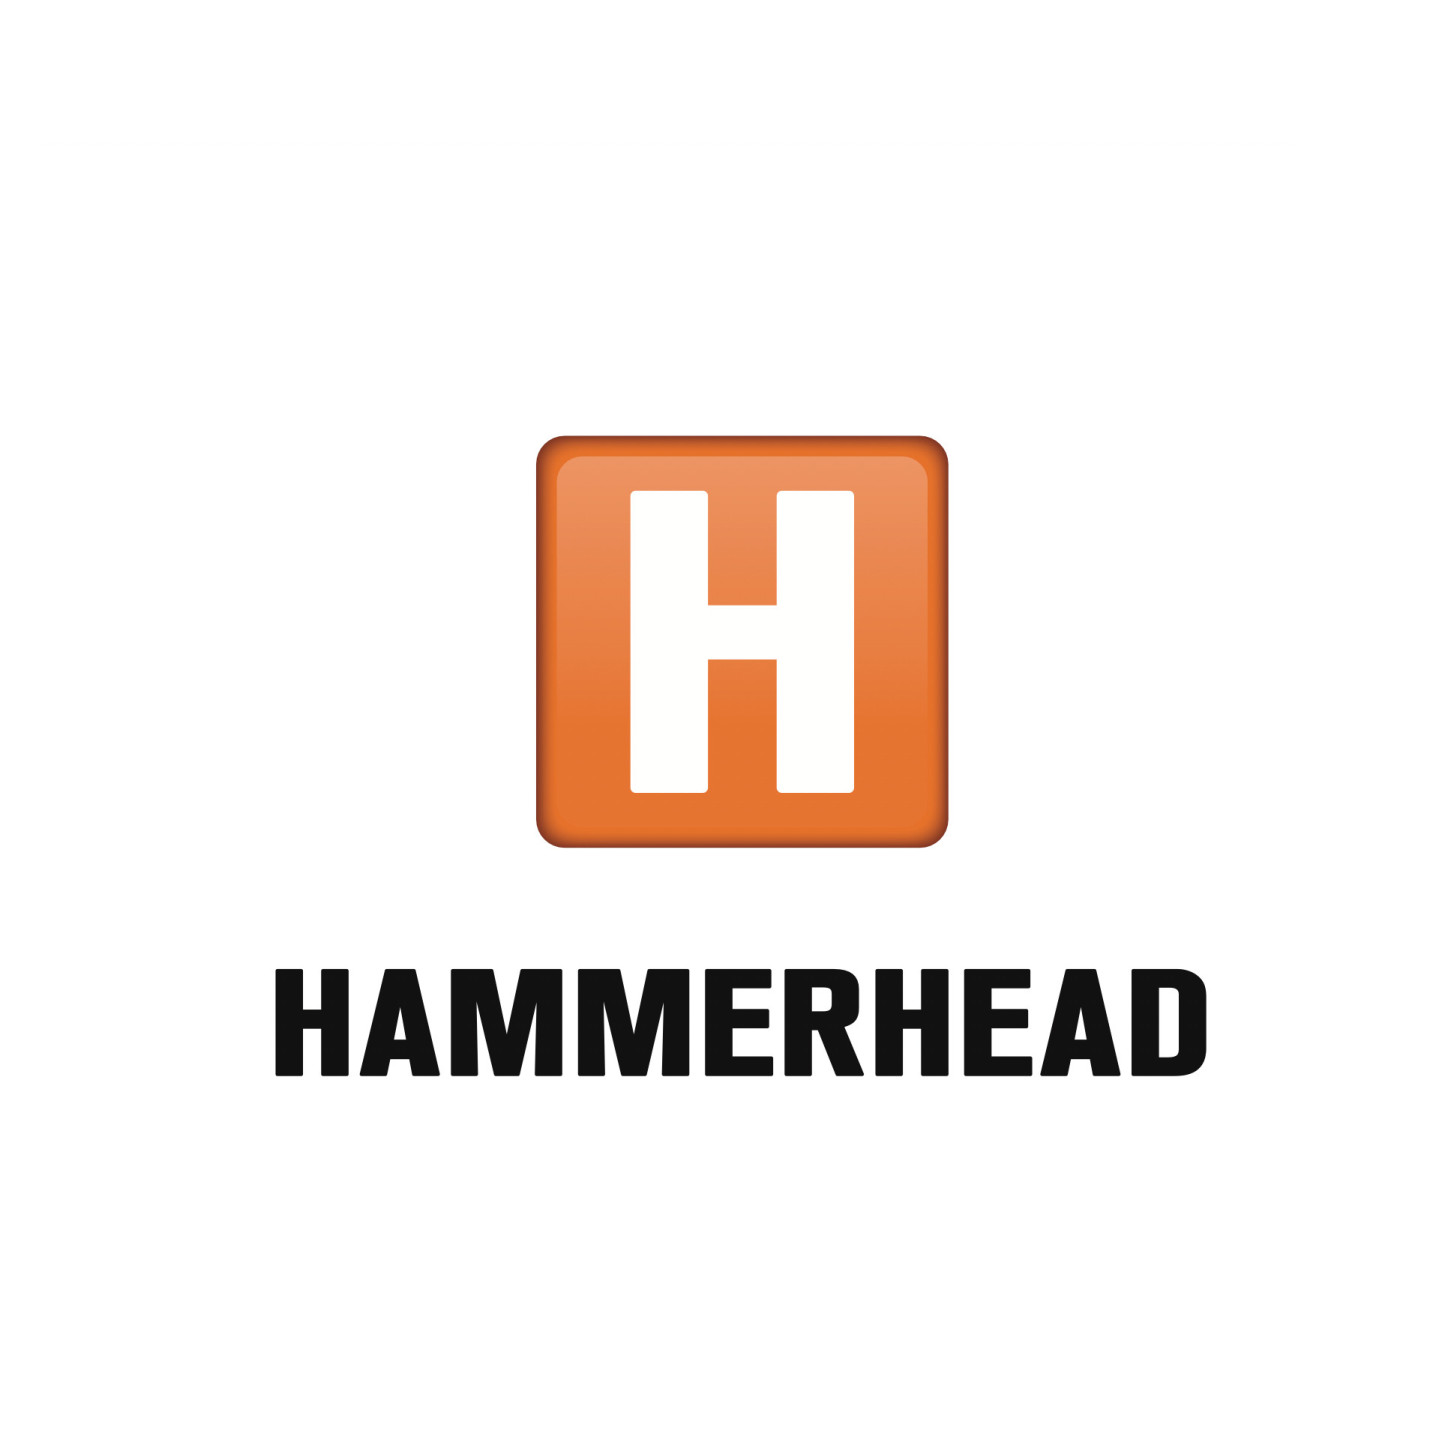 HAMMERHEAD OÜ - Other real estate management or related activities in Tallinn